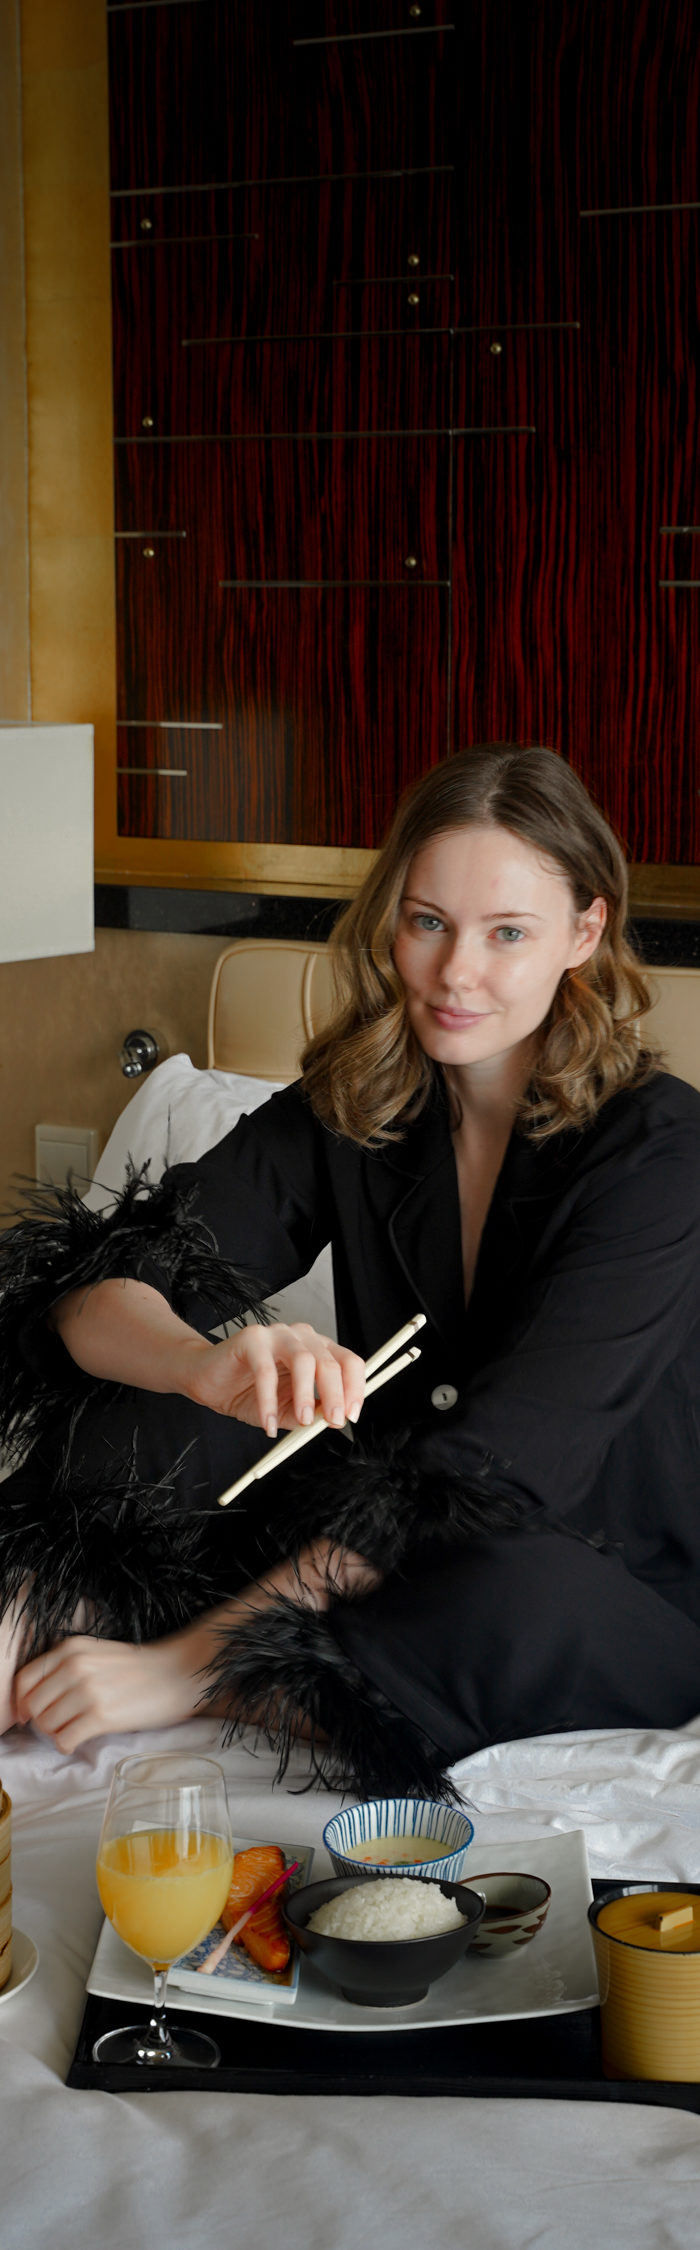 Miss USA 2011 Alyssa Campanella of The A List blog stays at Four Seasons Hotel Hong Kong for her birthday